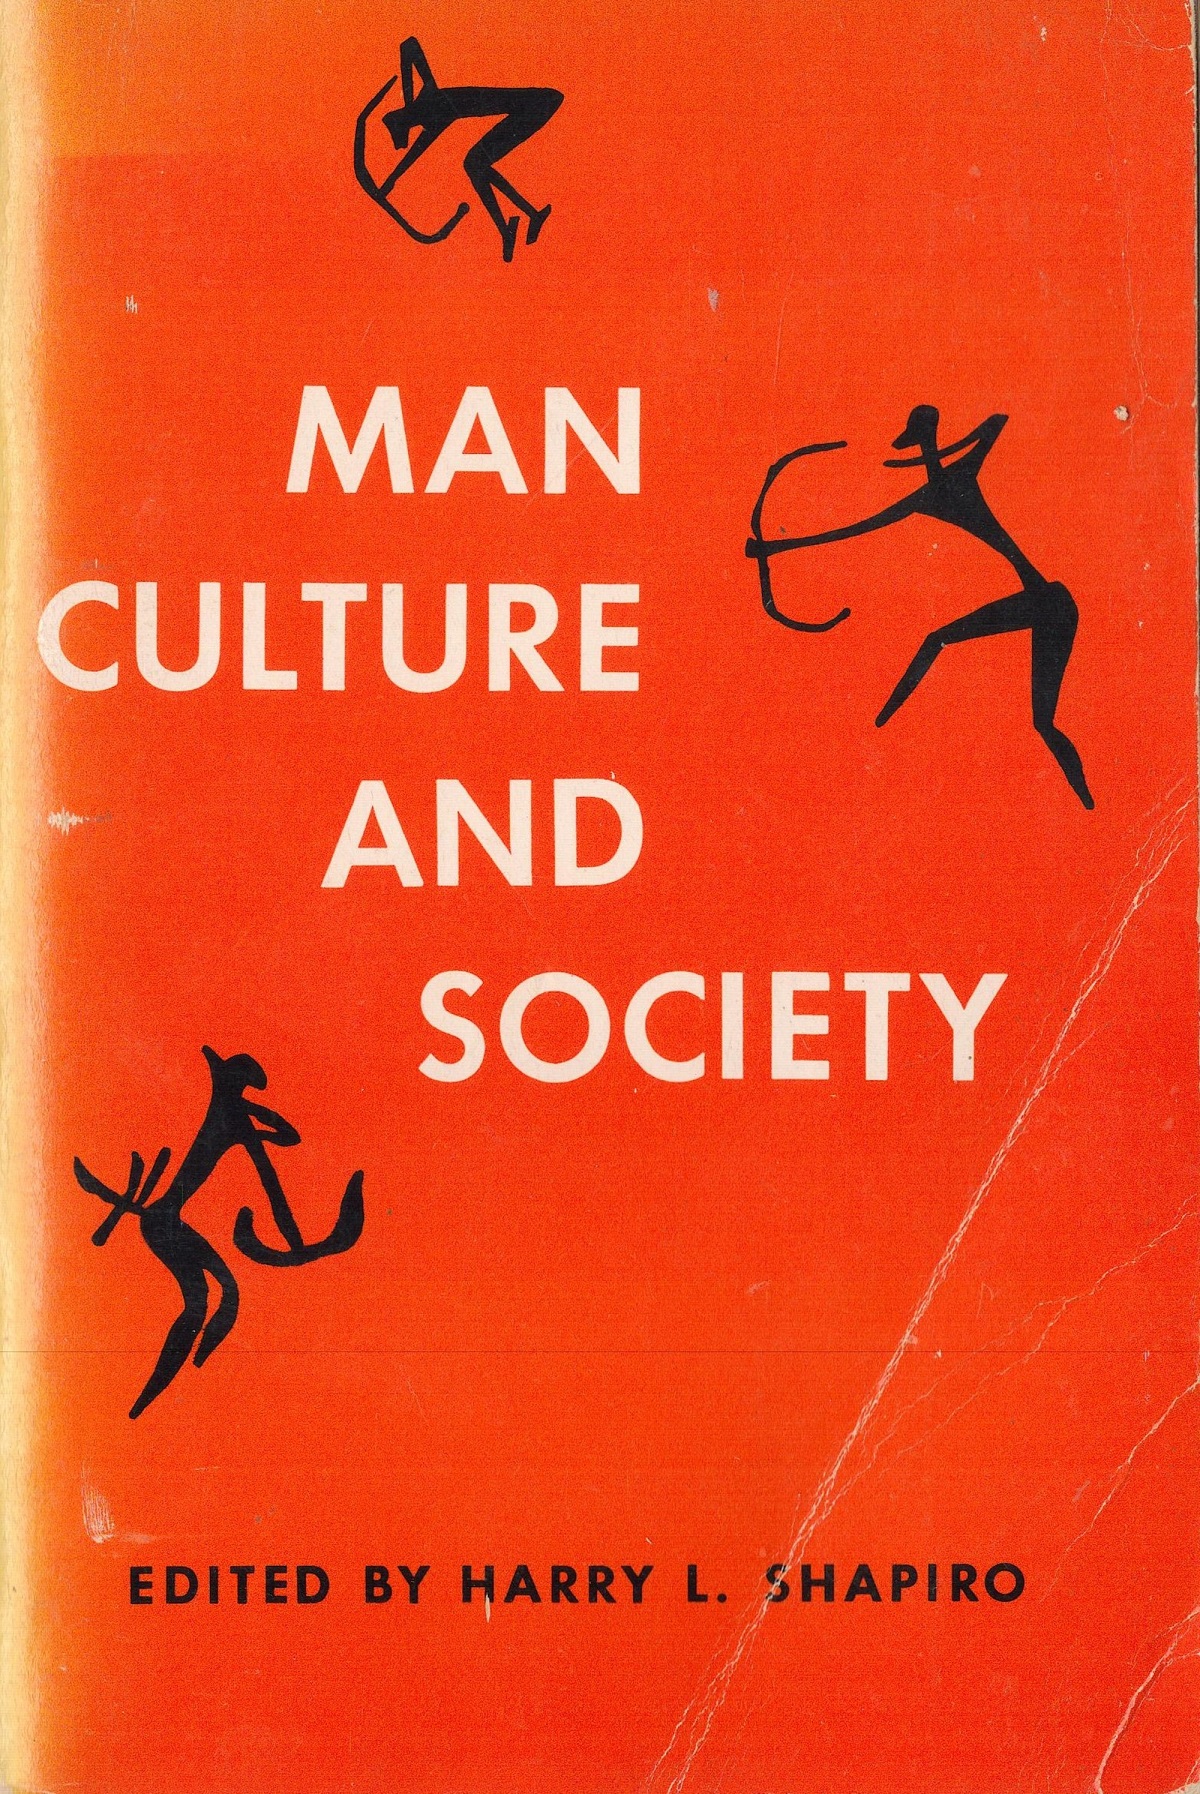 Man, Culture, and Society edited by Harry L Shapiro Softback Book 1971 Revised Edition published - Image 2 of 6